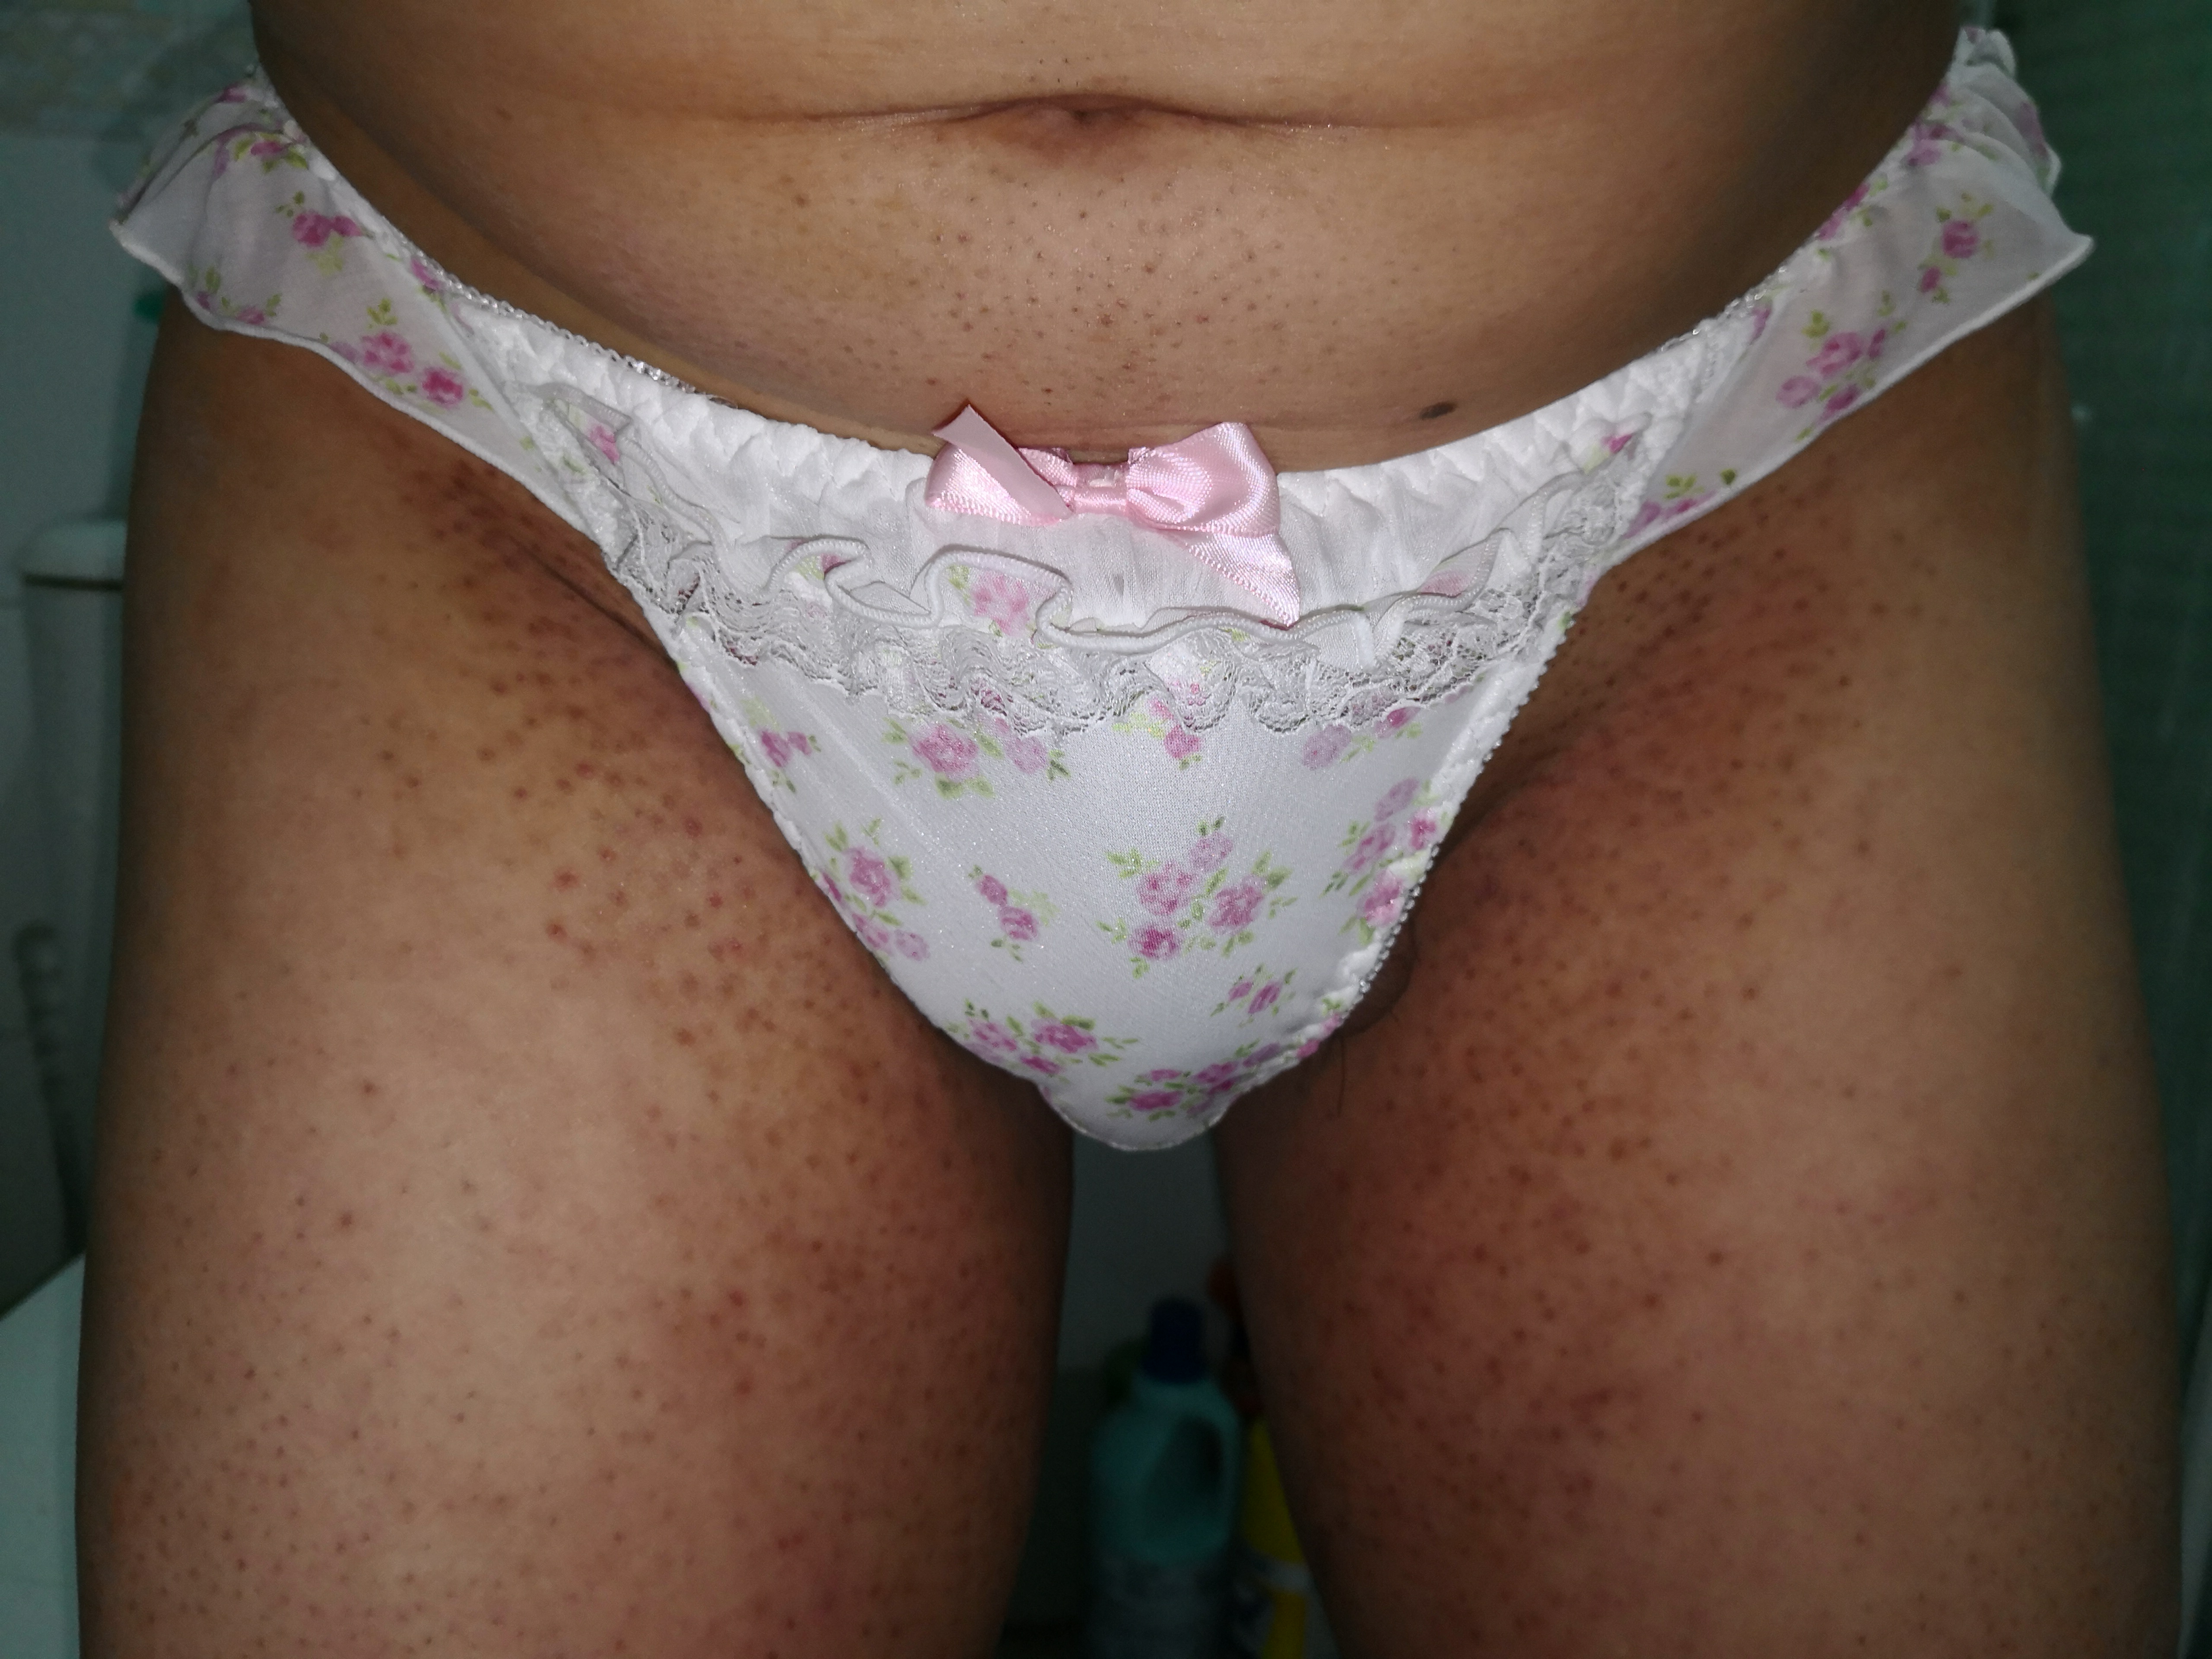 Put on this cute white flower pattern panty.It's ready to play by me.